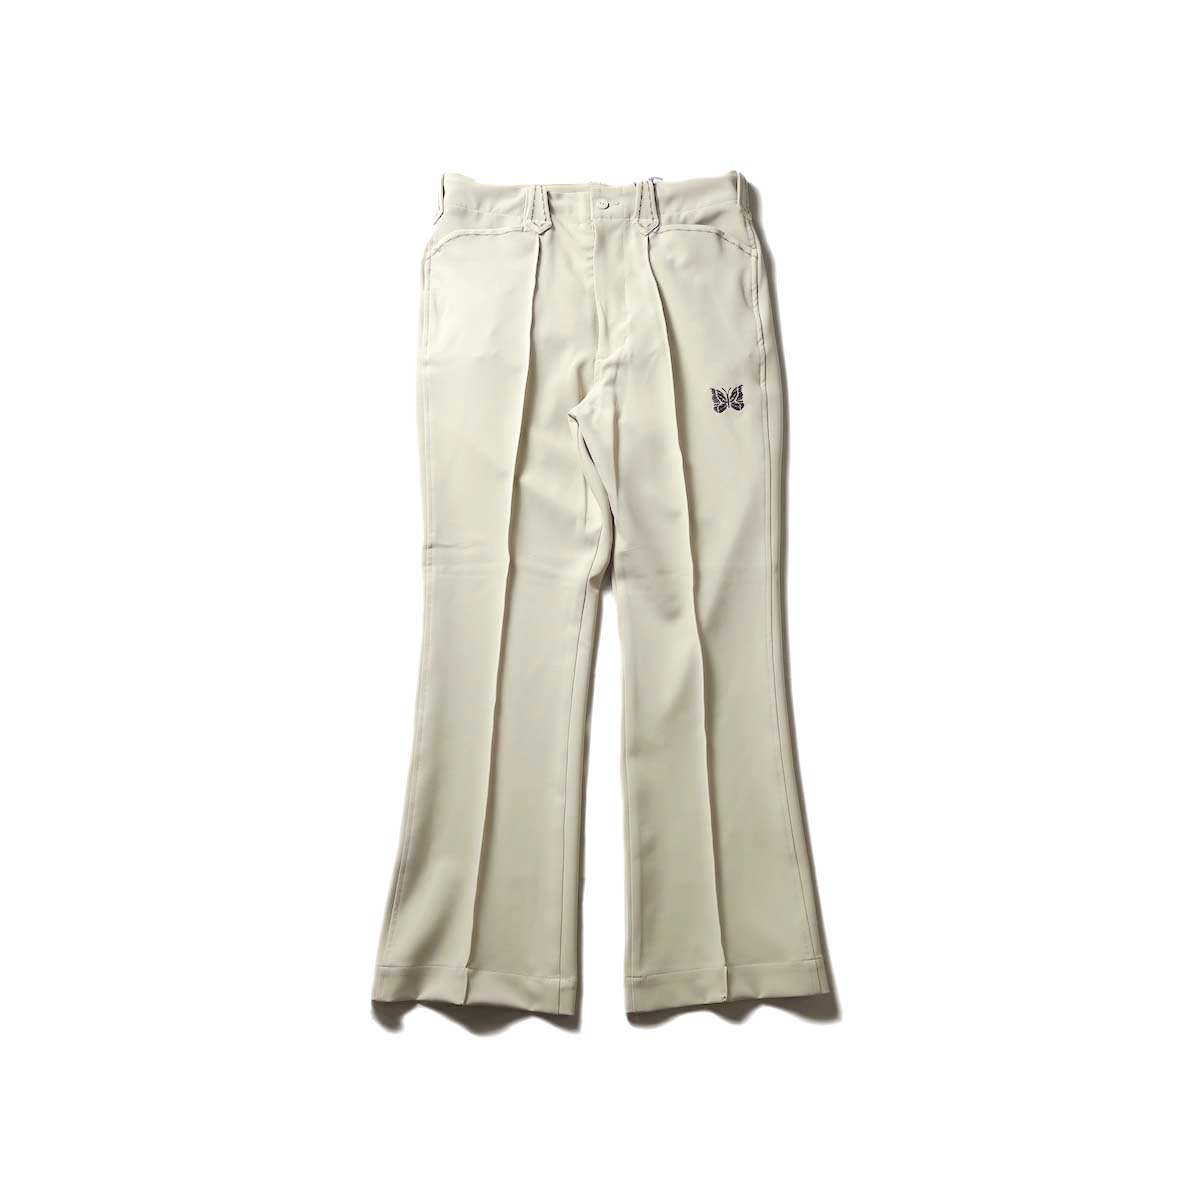 Needles / Western Leisure Pant - PE/PU Double Cloth (Beige)正面